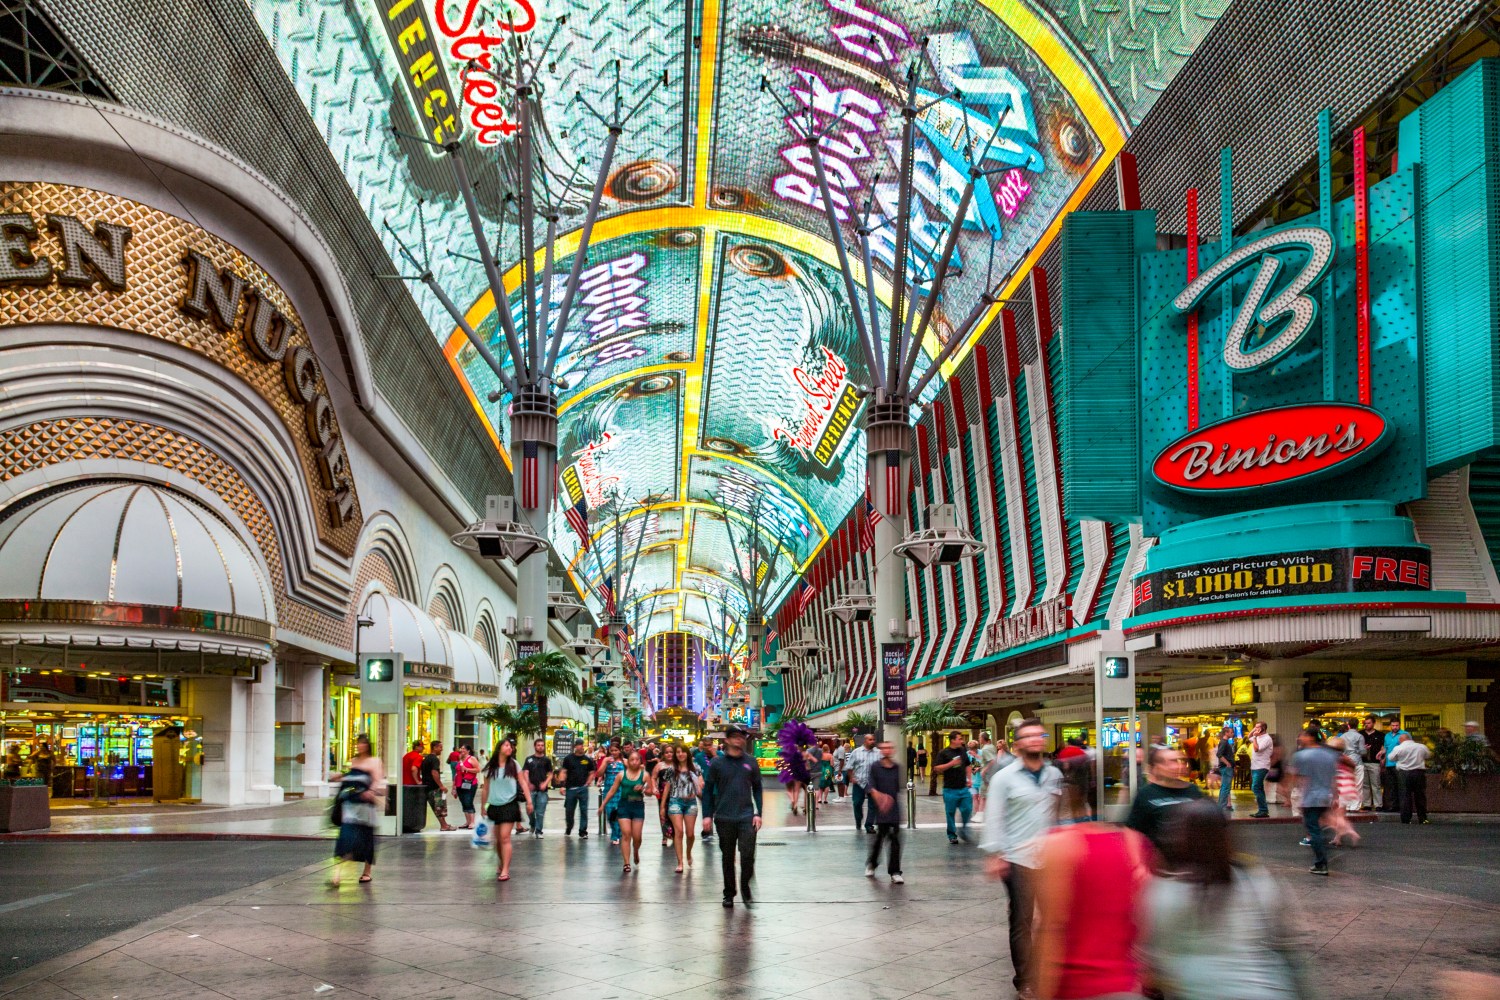 Fremont Street in Las Vegas, Nevada. The street is the second most famous street in the Las Vegas. Fremont Street dates back to 1905, when Las Vegas was founded.